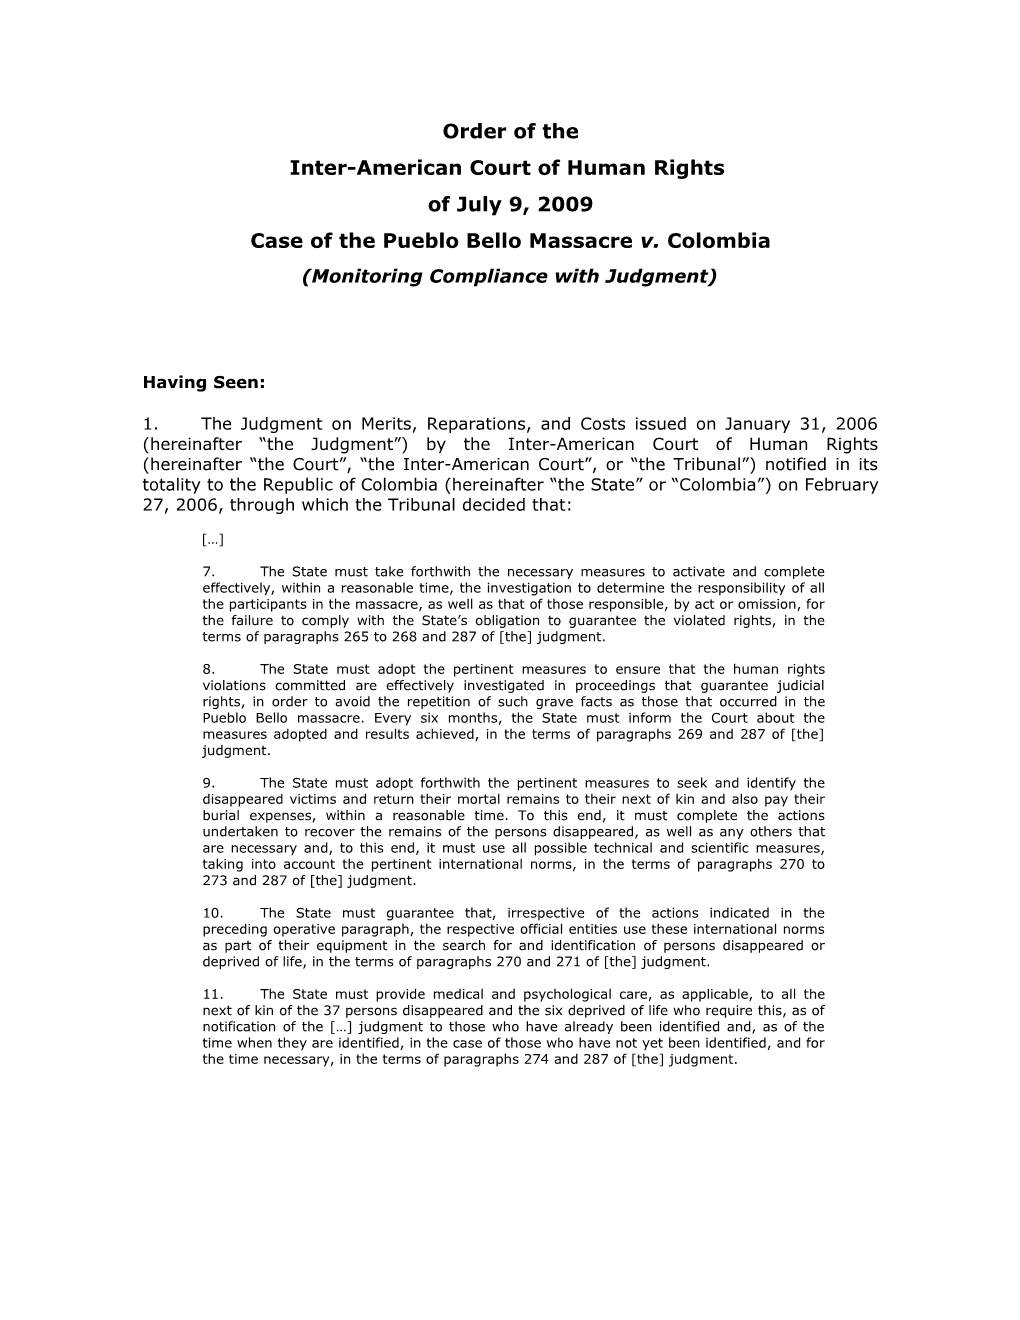 Inter-American Court of Human Rights s31